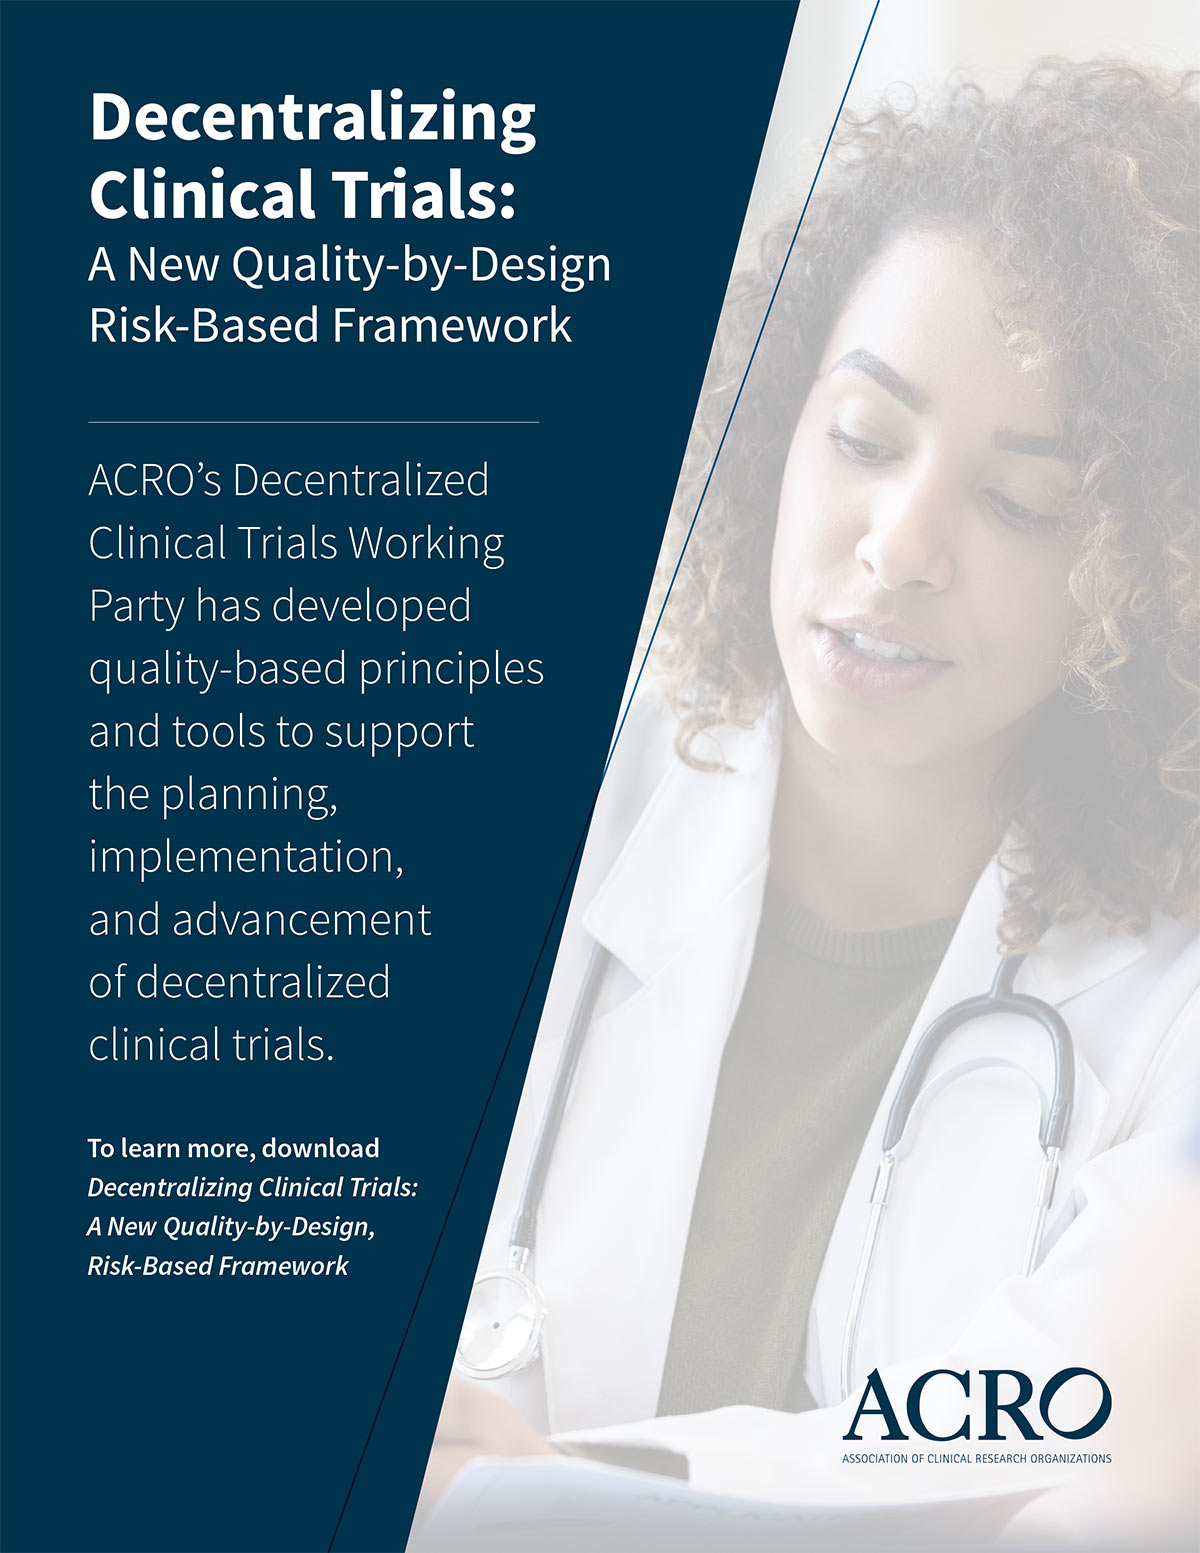 ACRO: Decentralizing Clinical Trials: A New Quality-by-Design, Risk-Based Framework